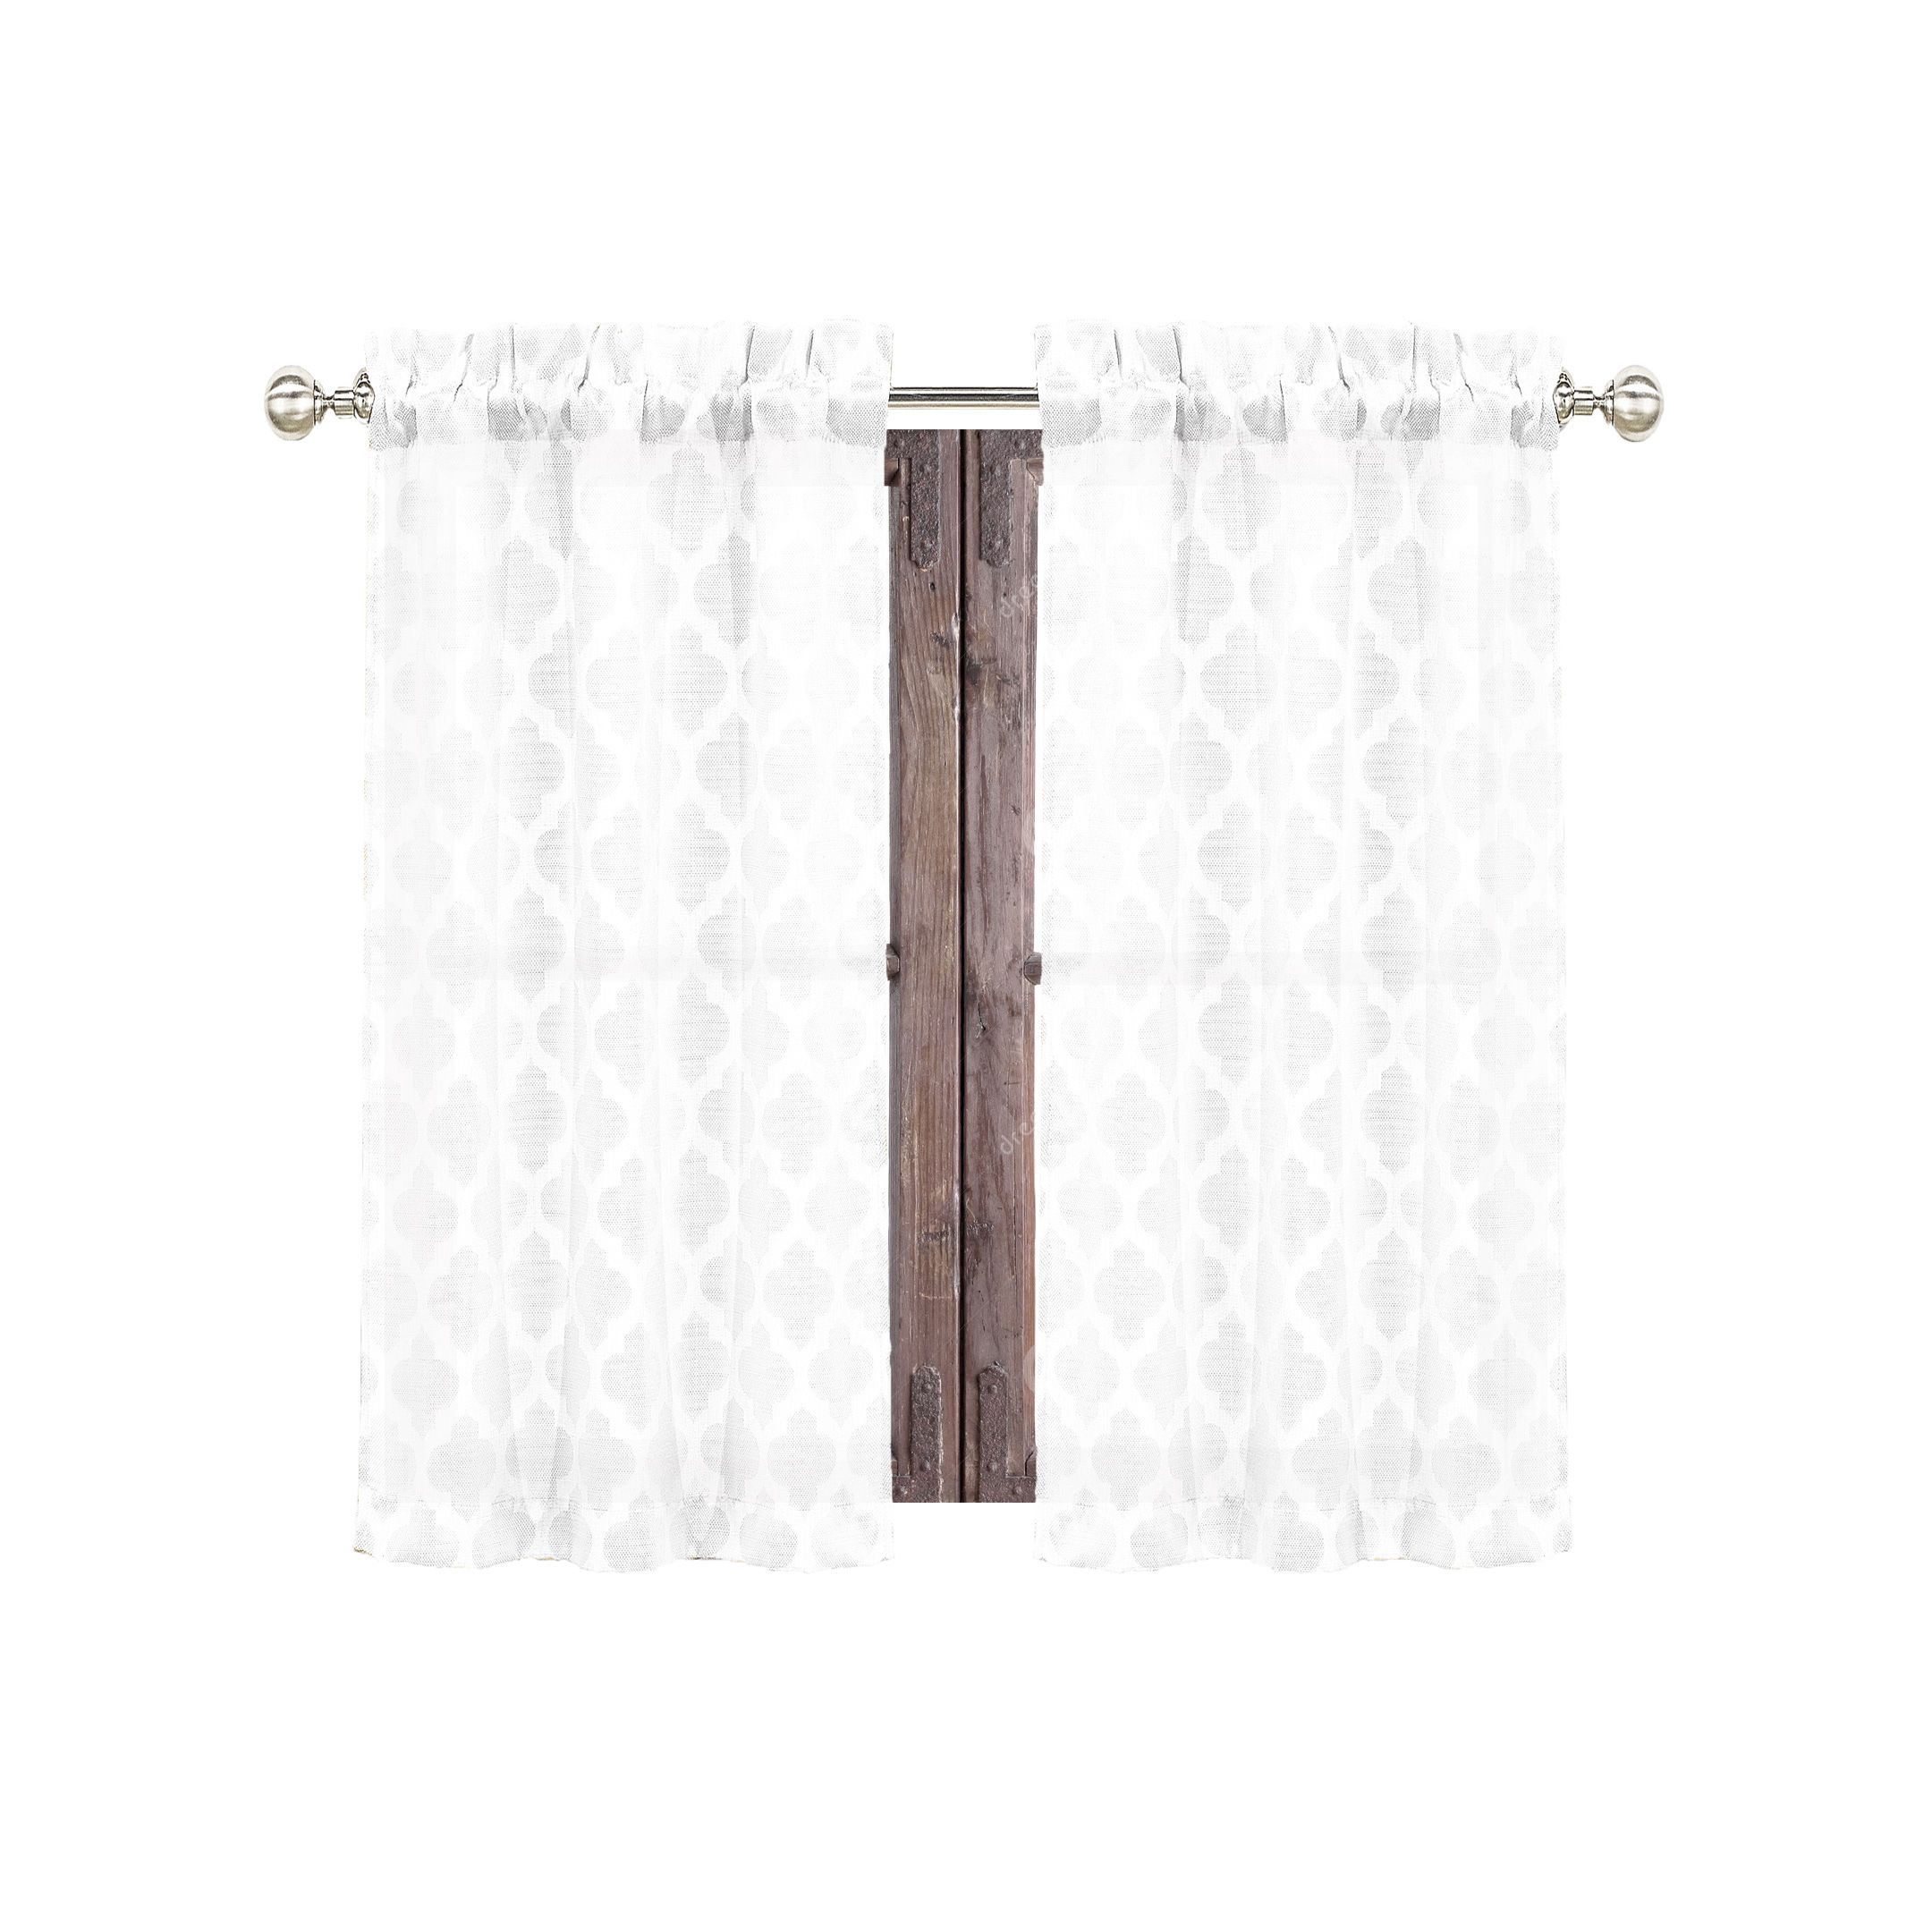 White 2 Piece Curtain Café Tier Set Textured Moroccan Pertaining To Elegant White Priscilla Lace Kitchen Curtain Pieces (View 8 of 20)